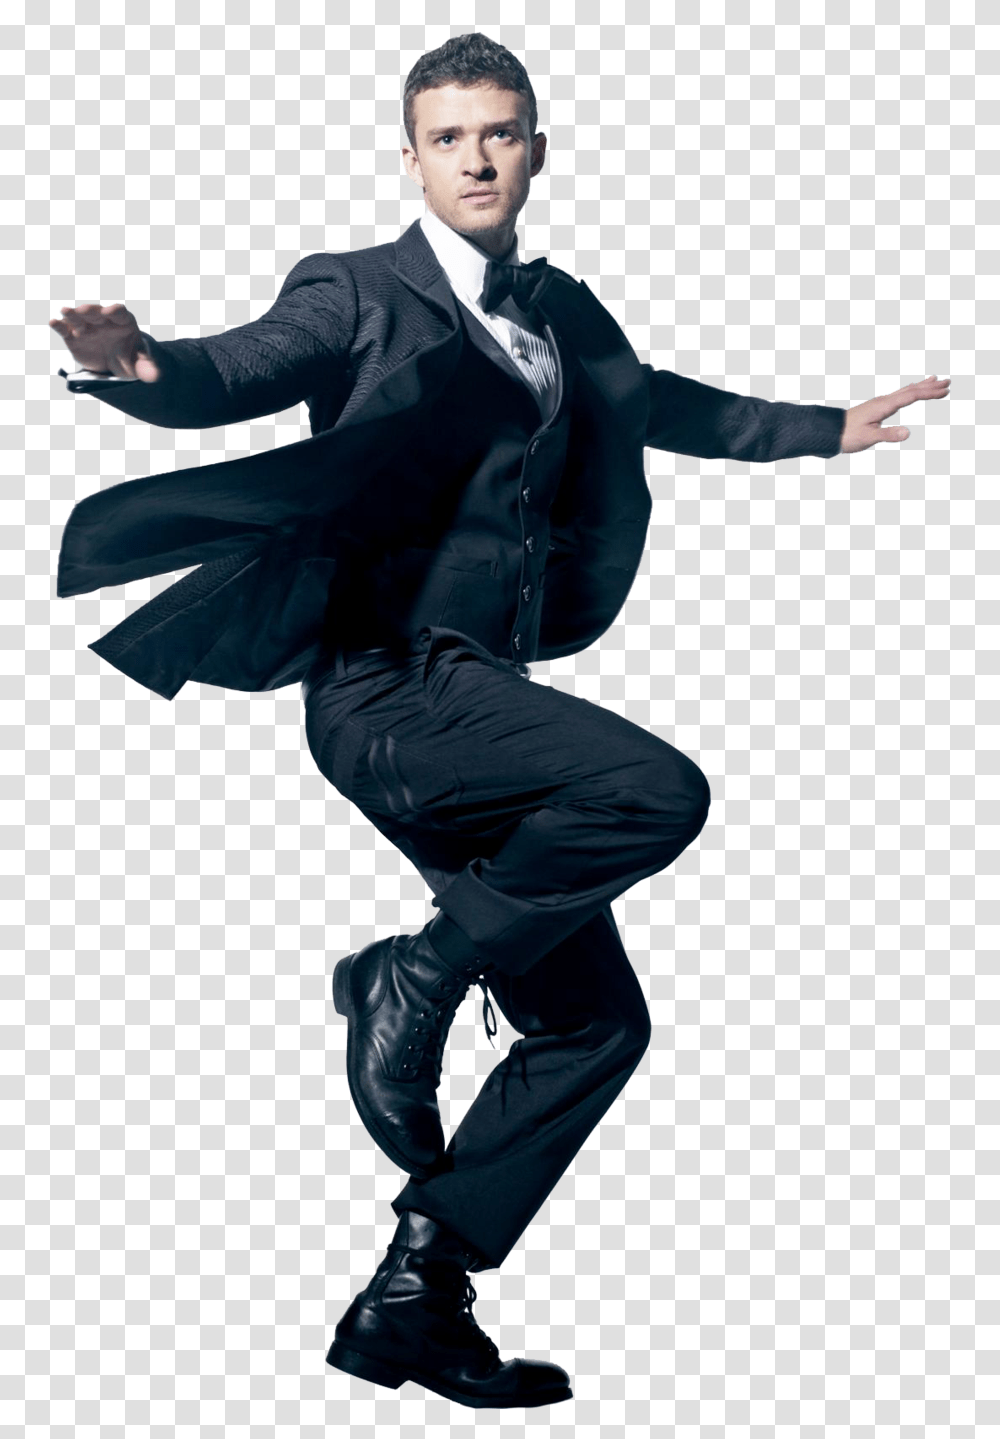 Justin Timberlake Image He Protec He Attac But Most Importantly He Bac, Ninja, Person, Suit Transparent Png